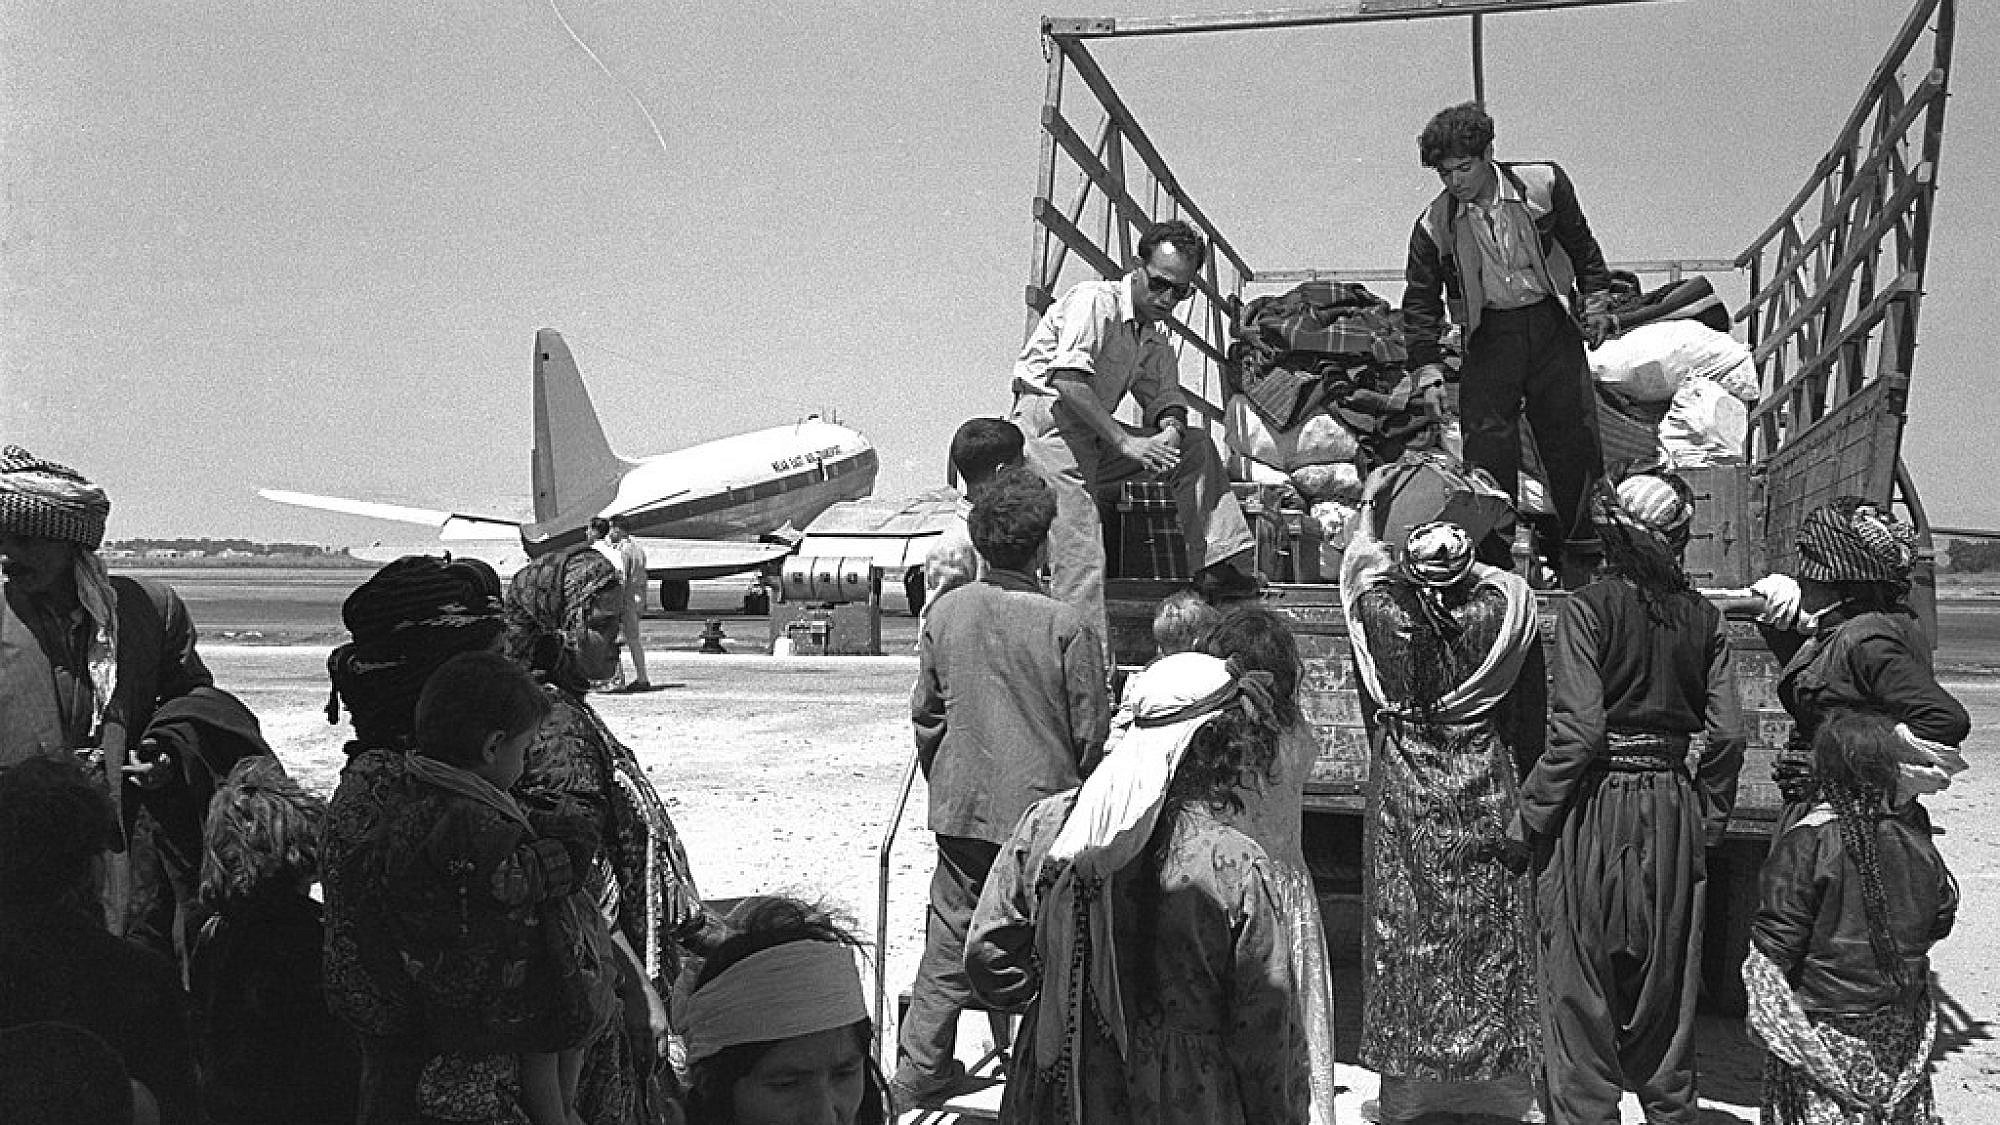 Jewish refugees from Iraq leave Lod (today Ben-Gurion) Airport, 1951. Credit: GPO via Wikimedia Commons.